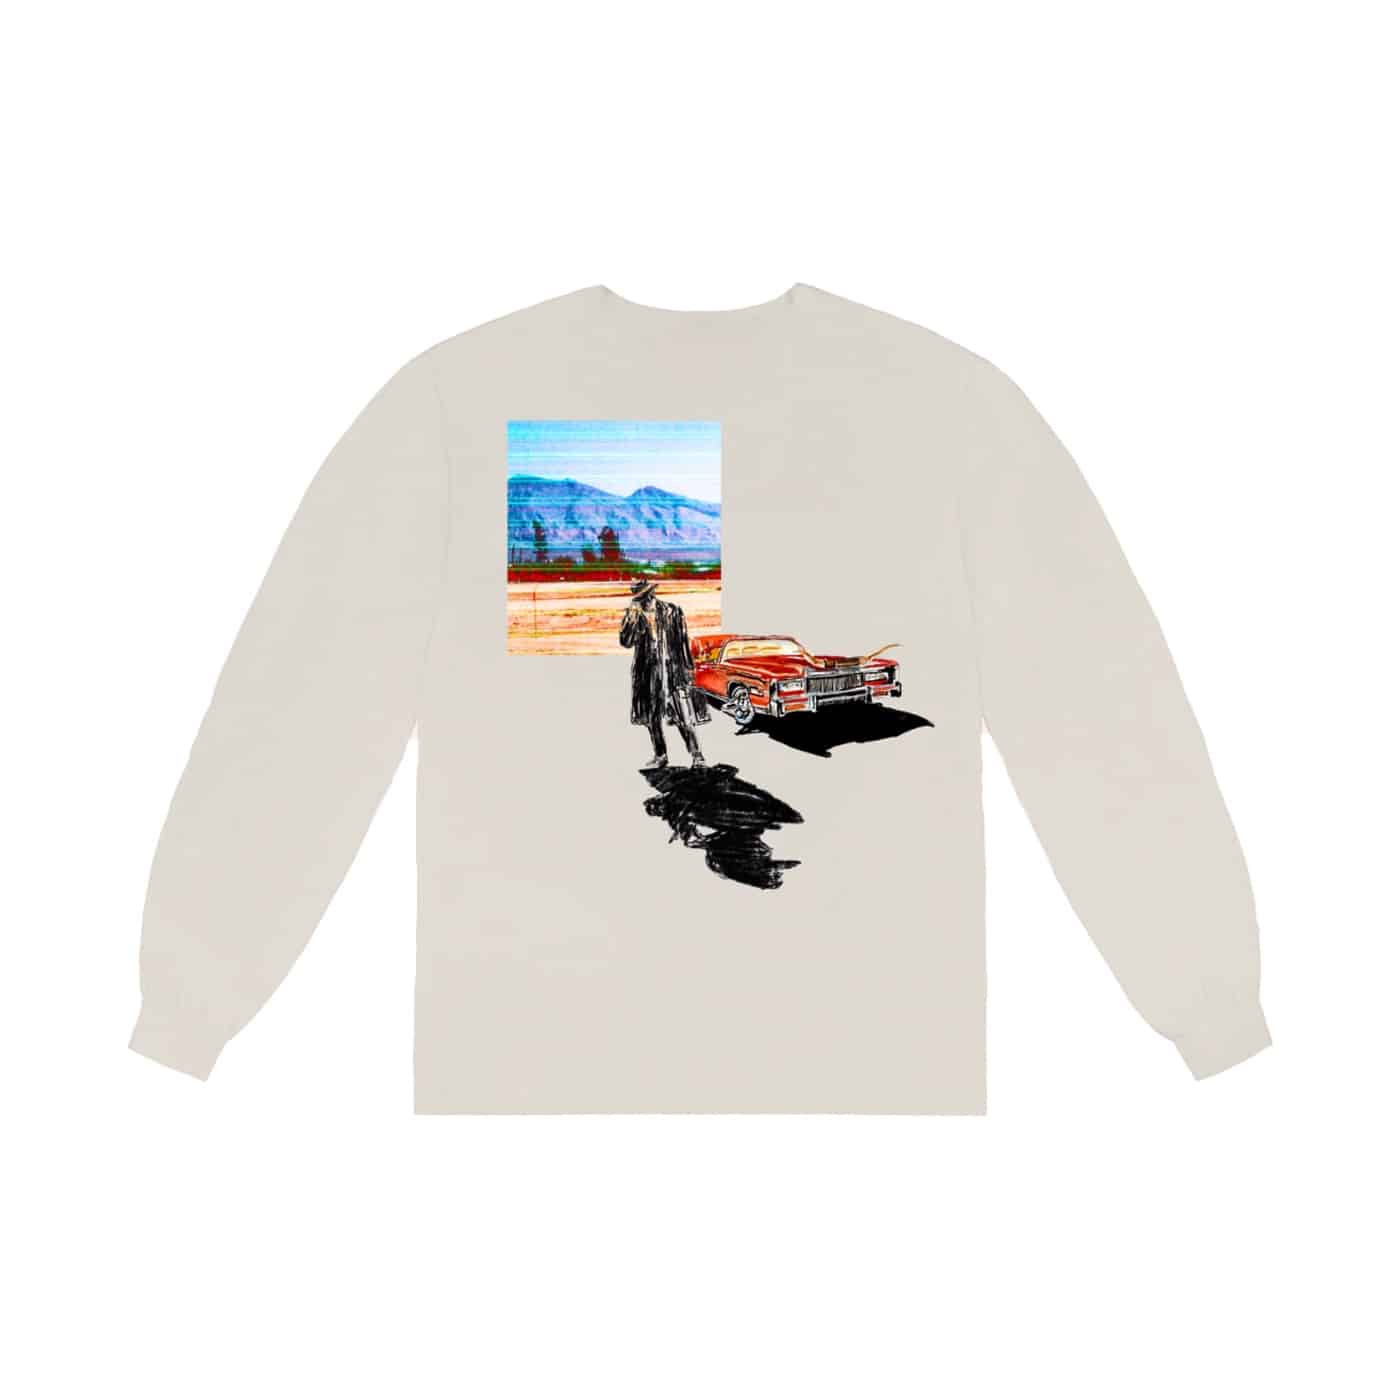 Don Toliver Heaven or Hell L/S Tee Natural